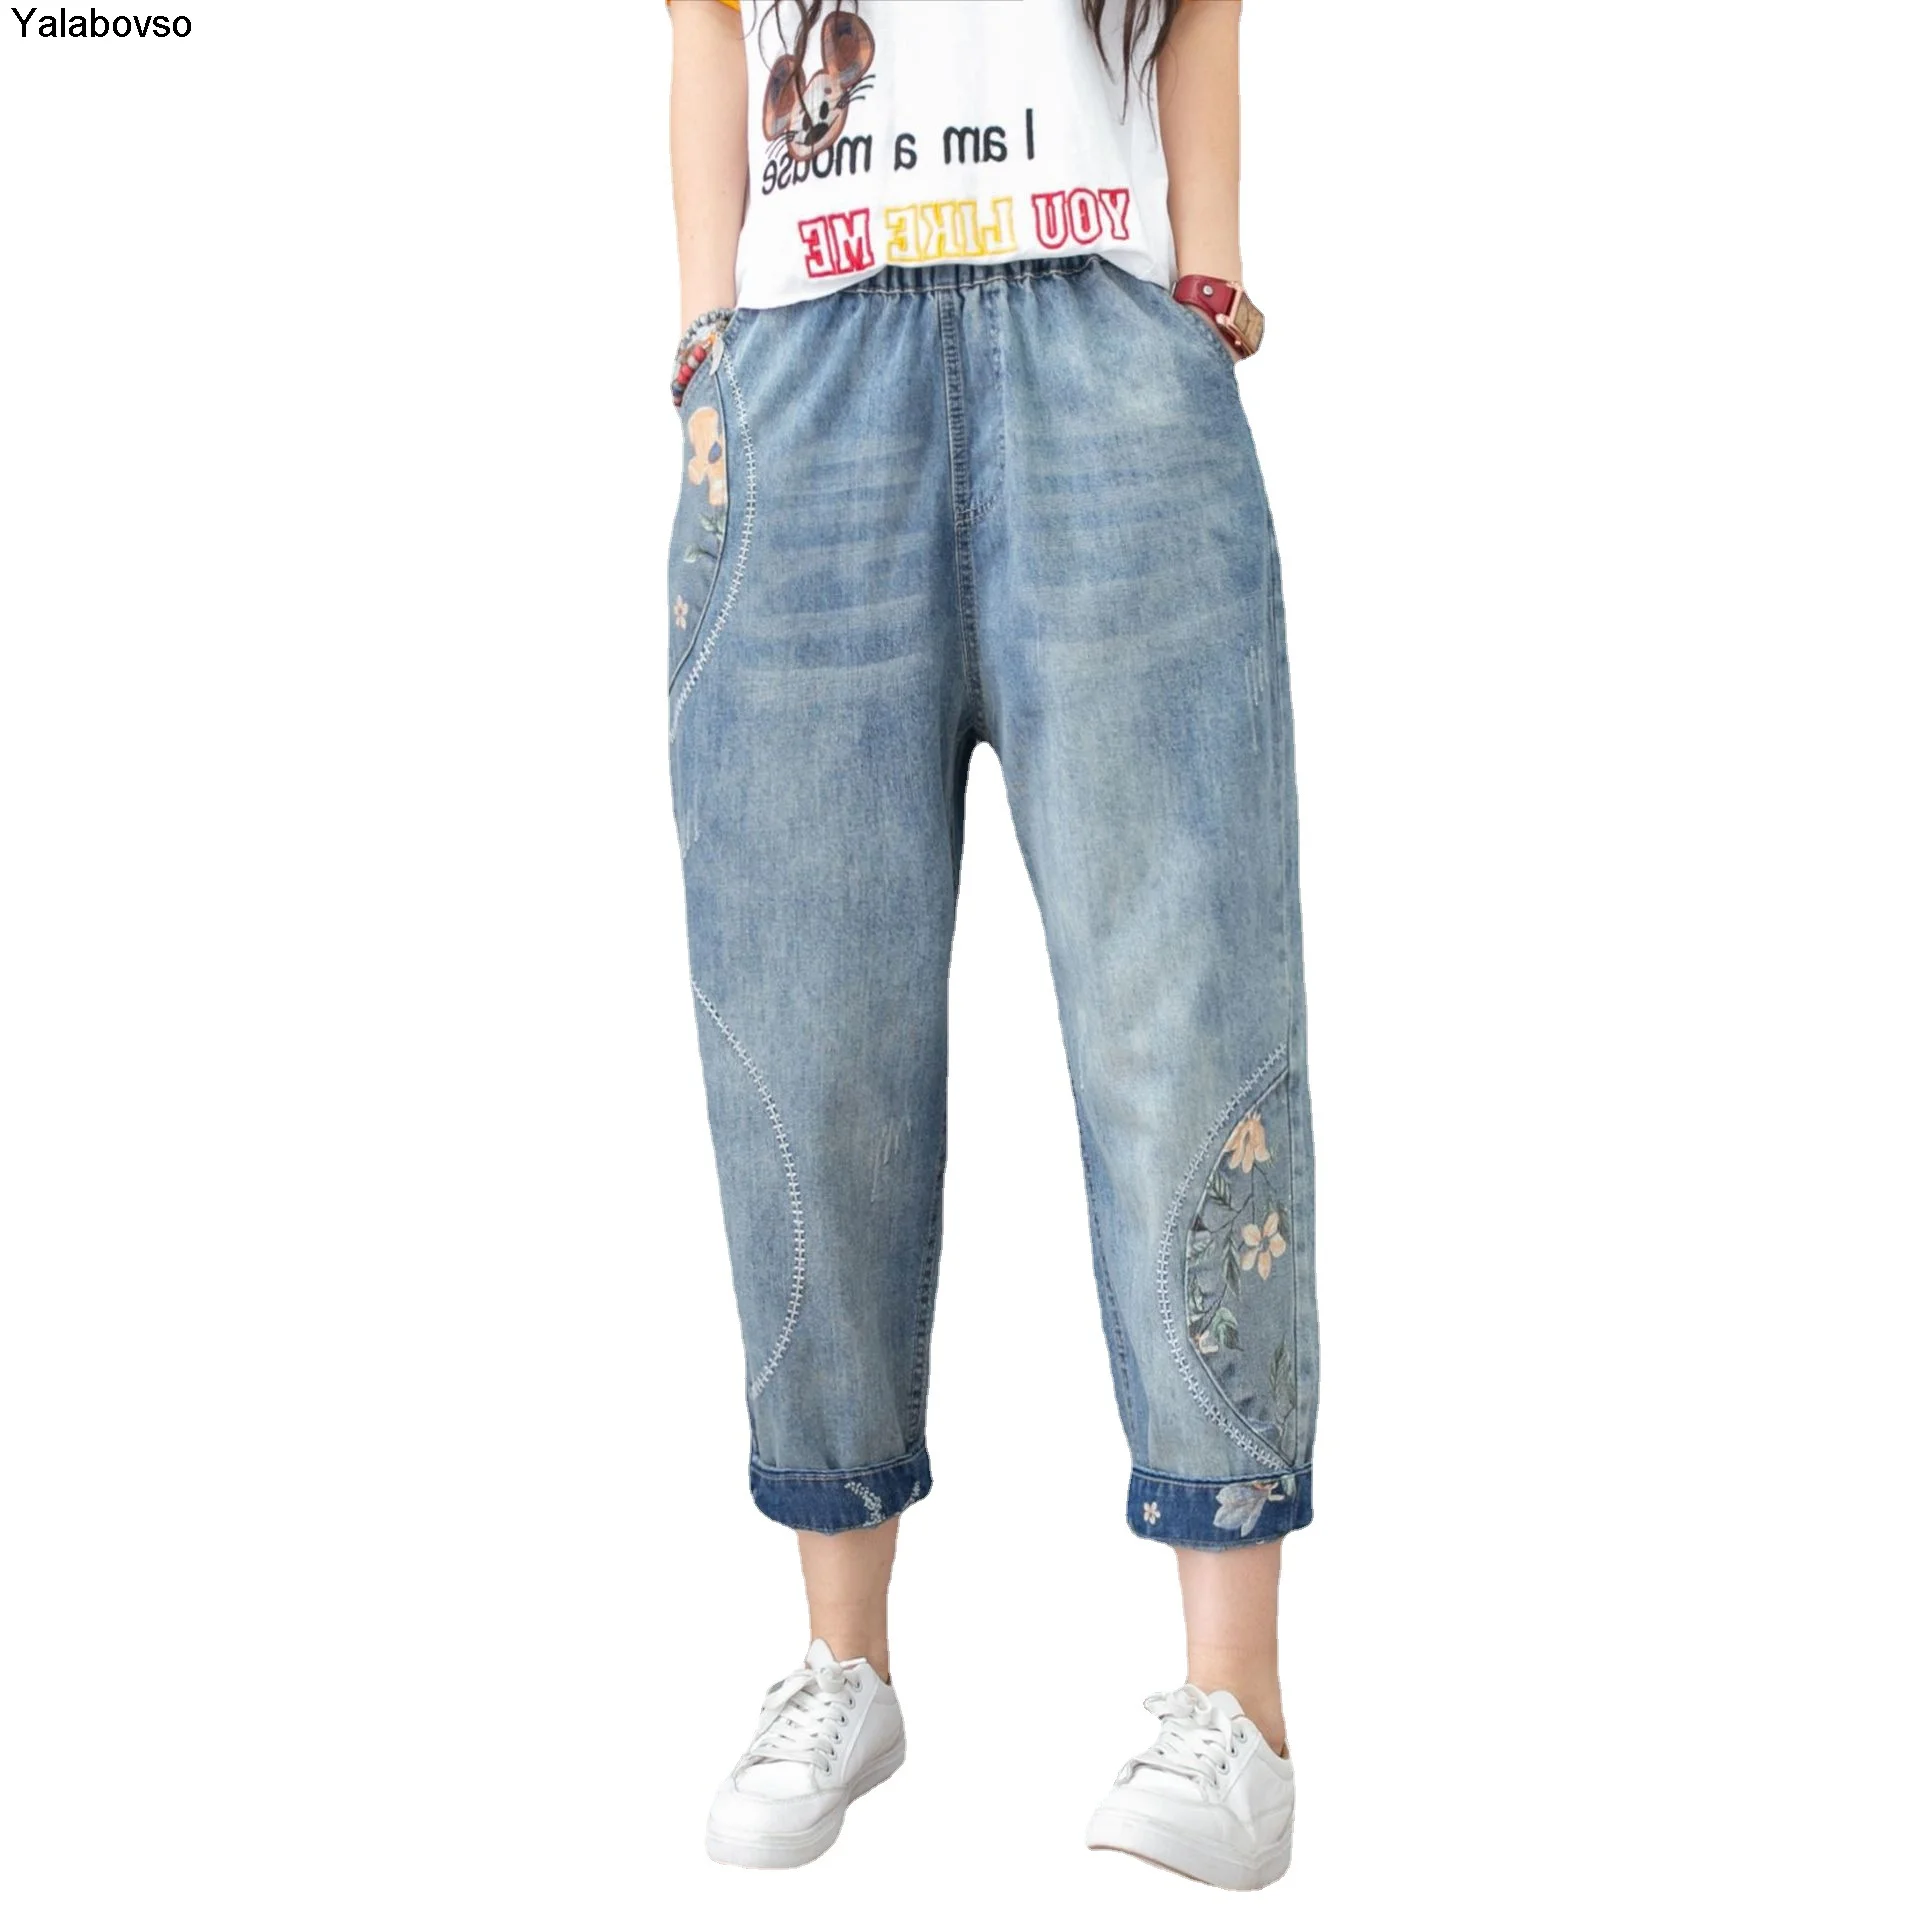 

Elastic Waist Denim Washed Cloth Embroidery Casual Loose Calf-lenght Jeans Mujer Women Trousers Soft Ripped